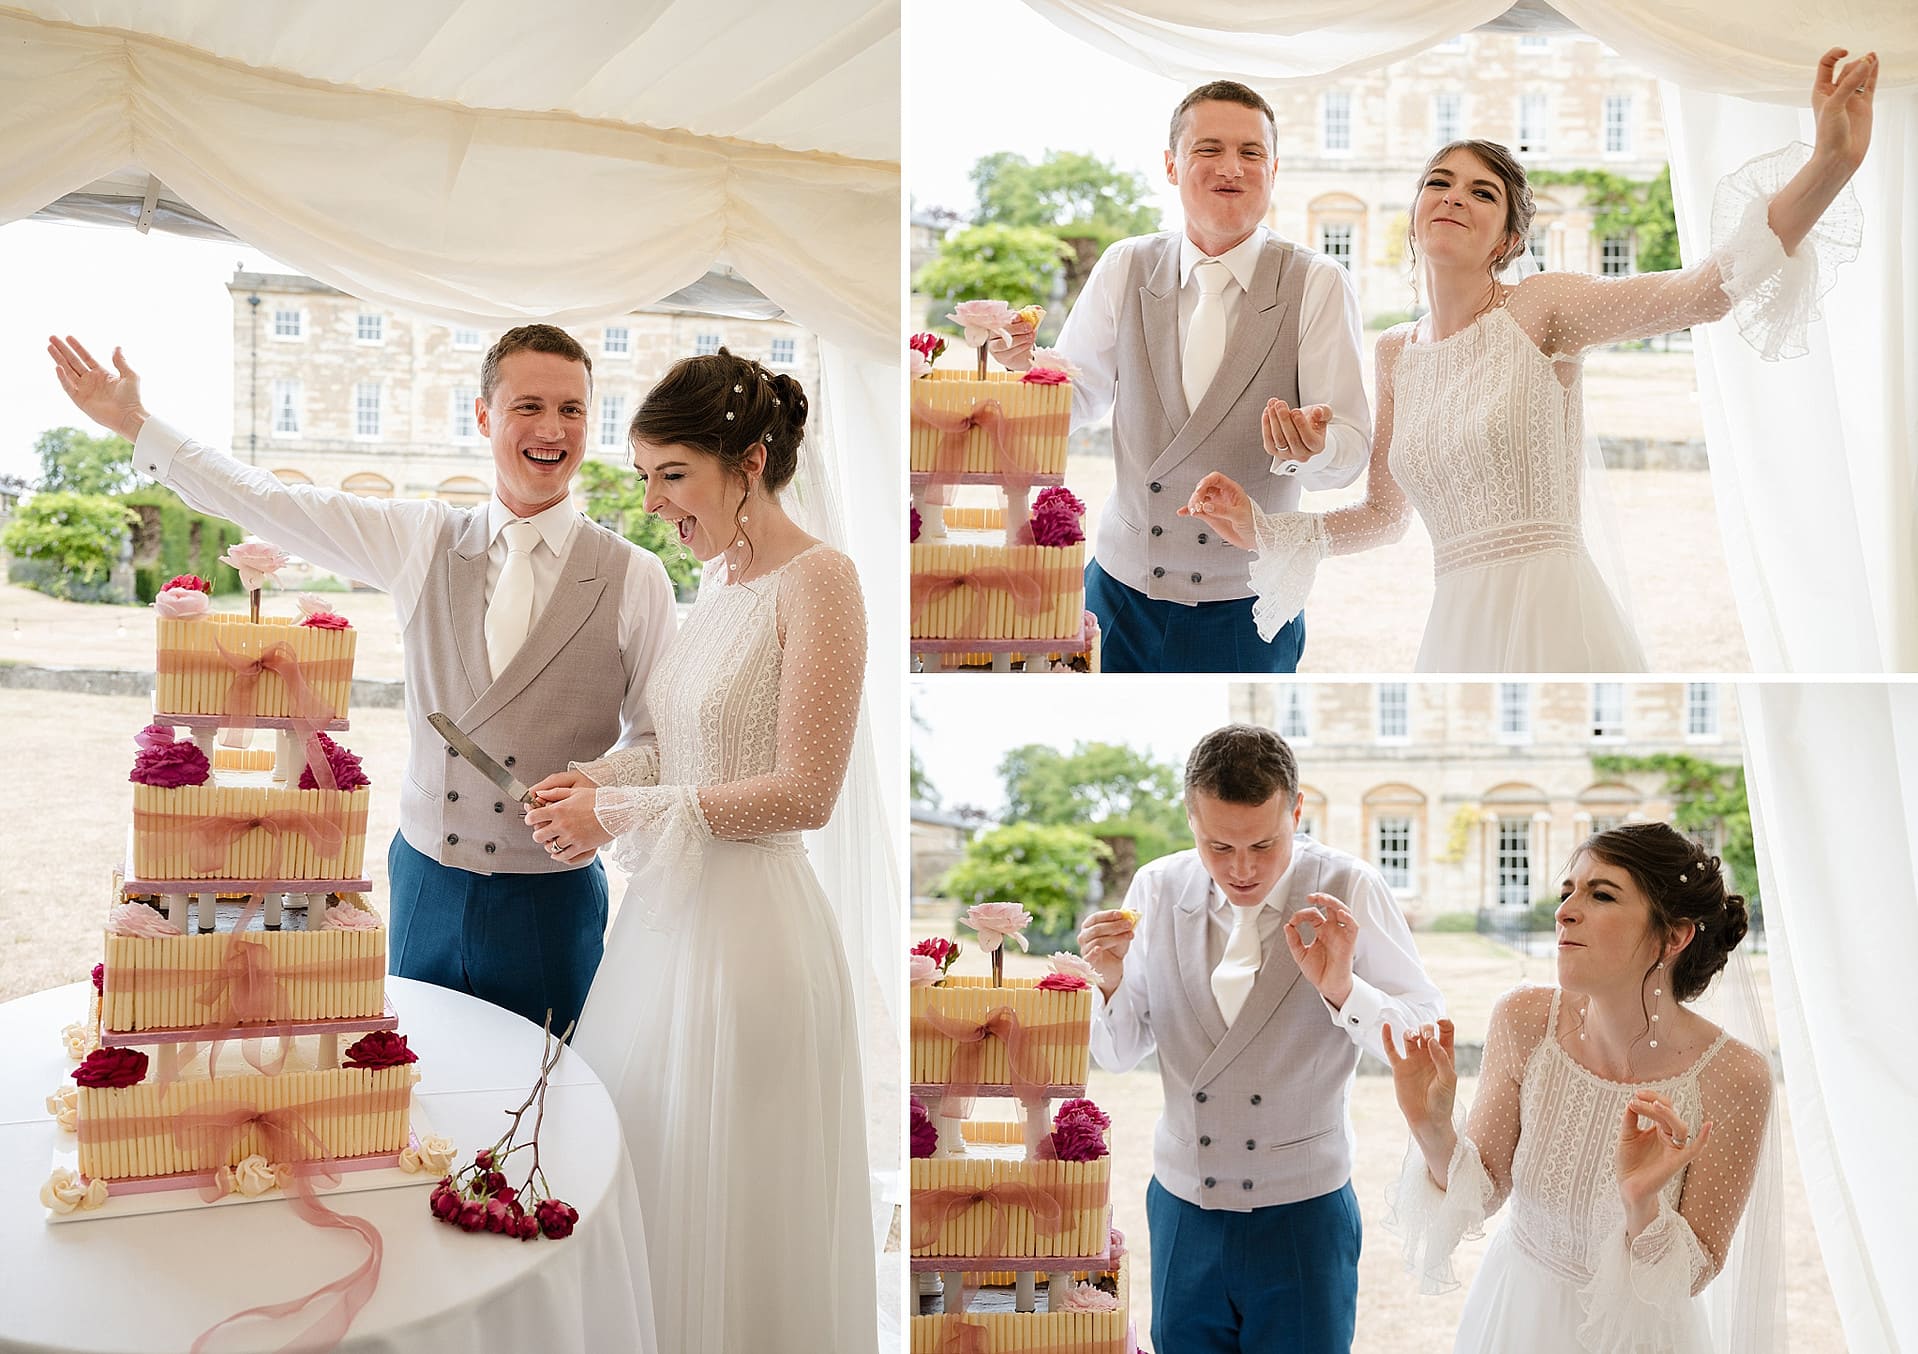 Bride and groom taste testing their wedding cake and giving a 'perfect' hand gesture in approval